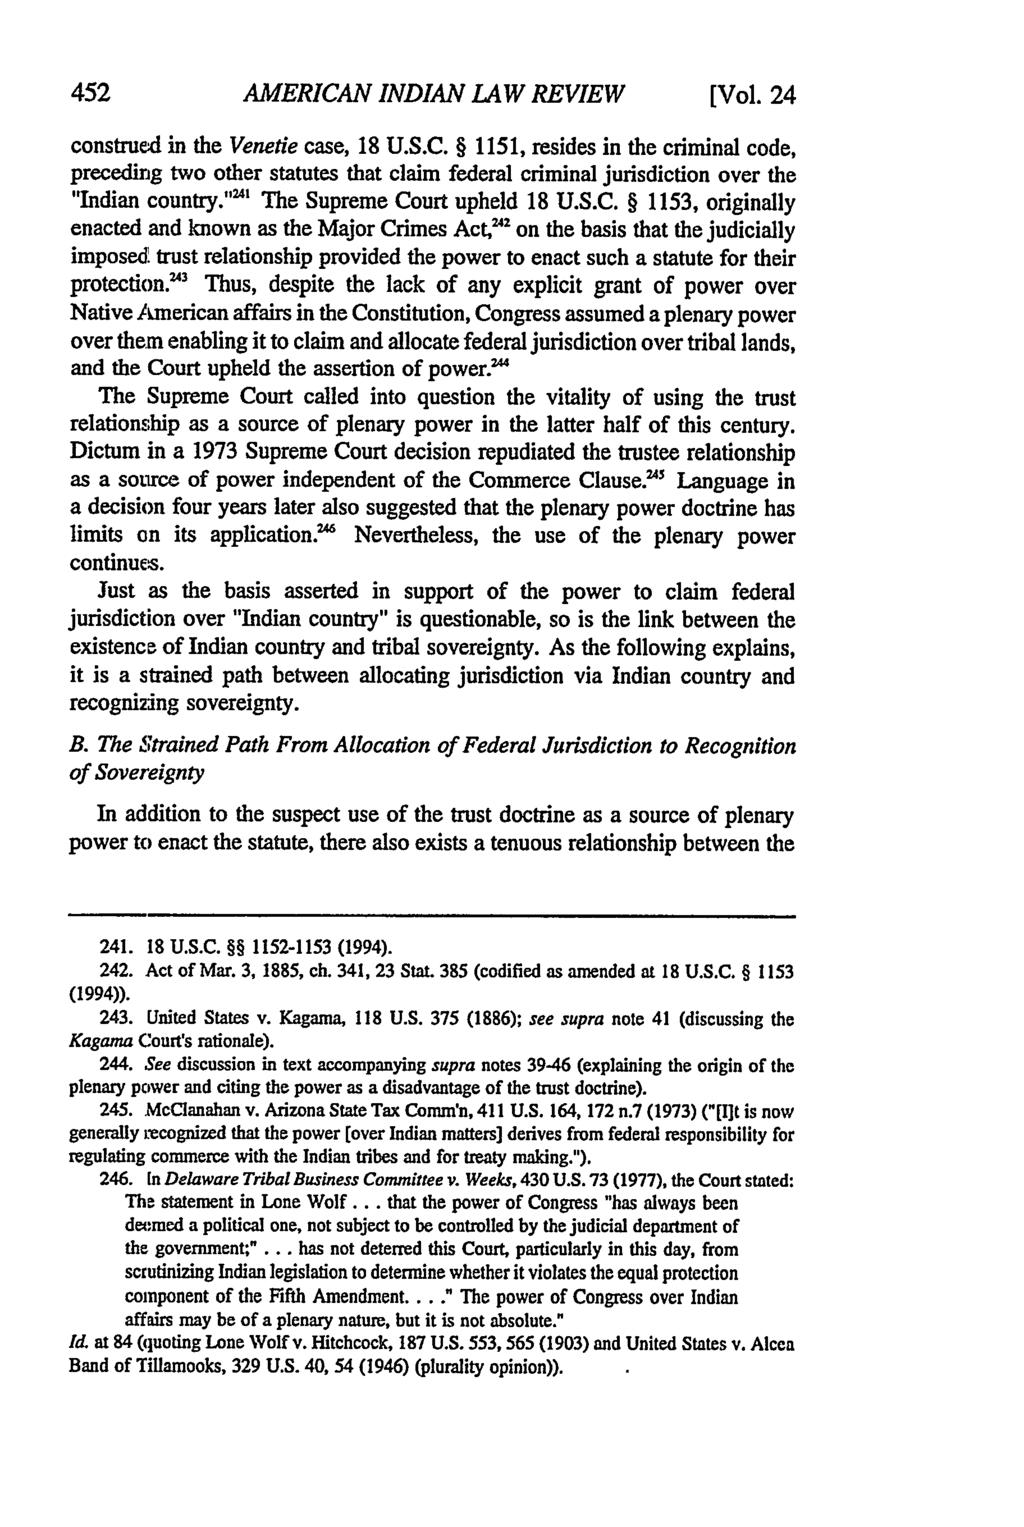 452 AMERICAN INDIAN LAW REVIEW [Vol. 24 construed in the Venetie case, 18 U.S.C. 1151, resides in the criminal code, preceding two other statutes that claim federal criminal jurisdiction over the "Indian country.